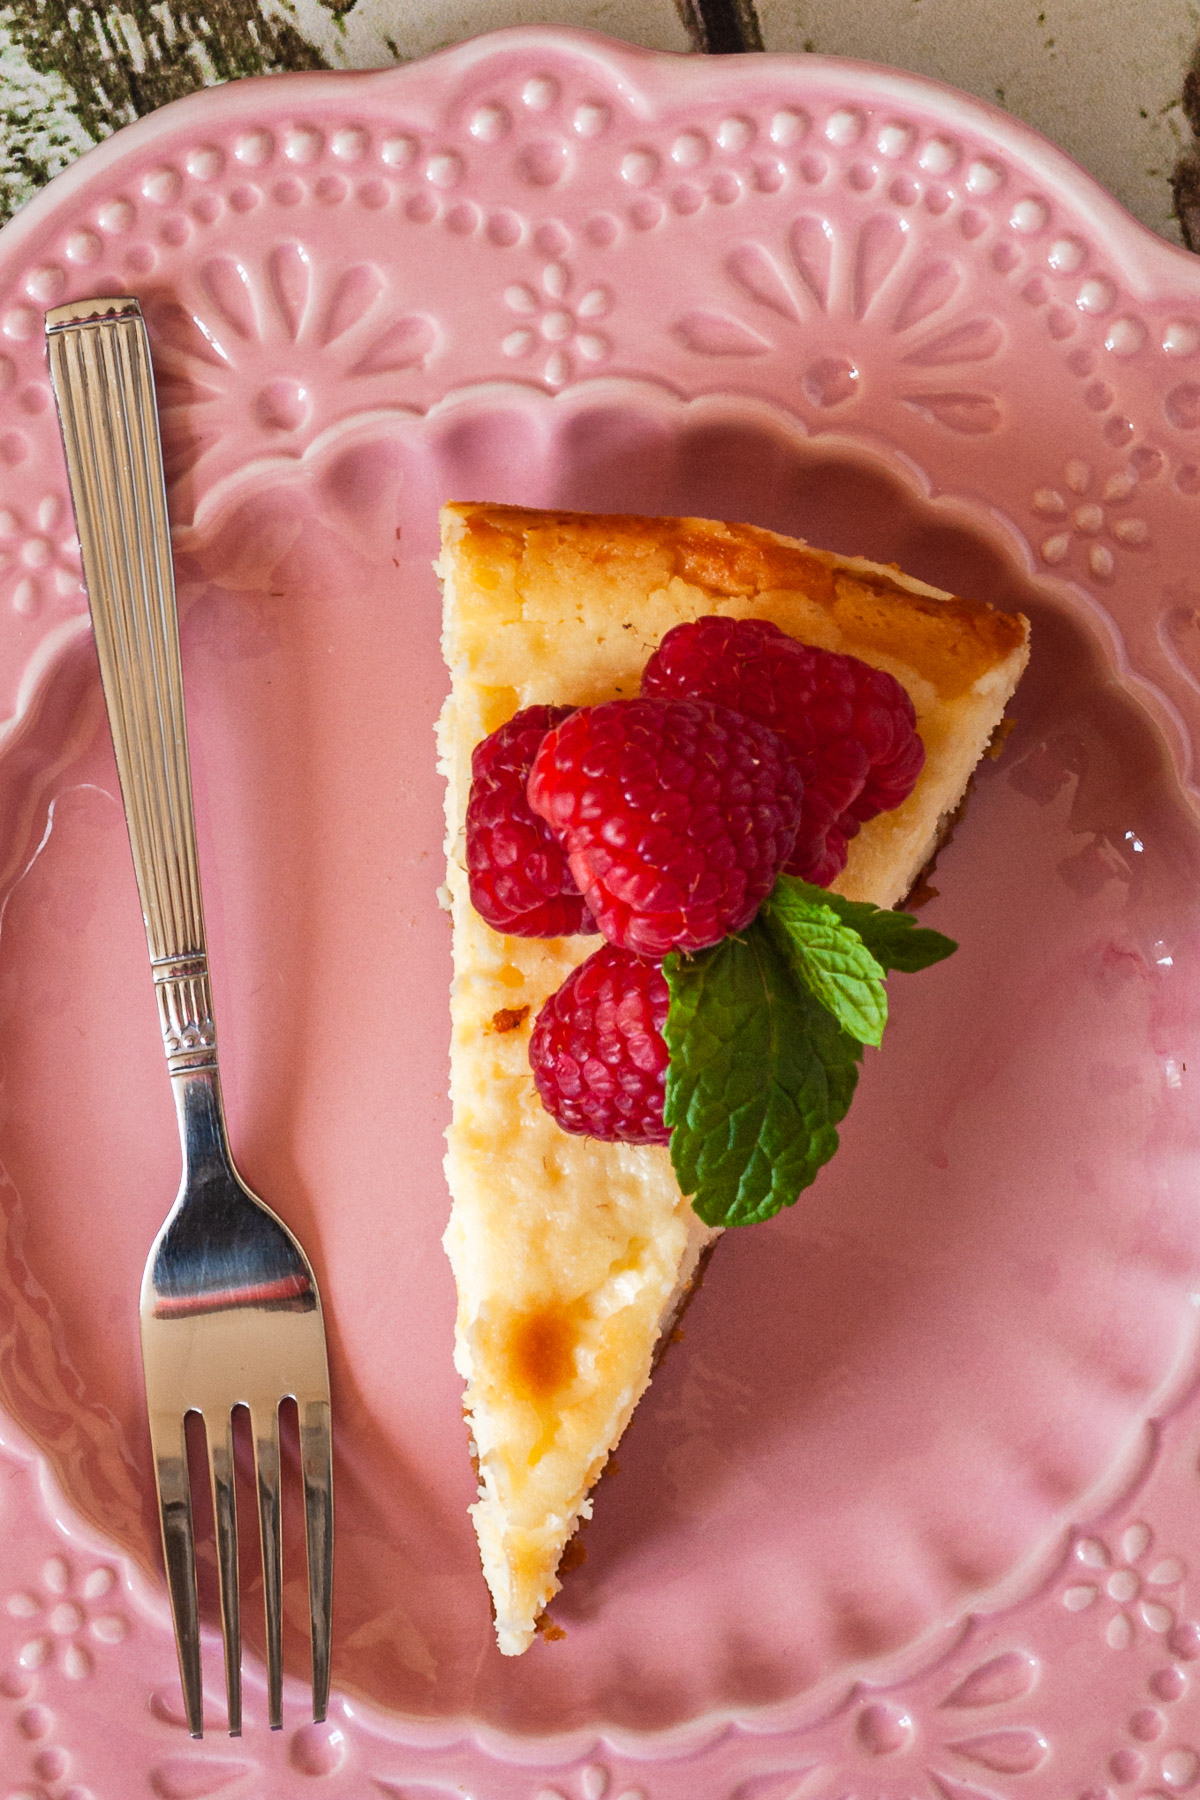 Closeup overhead view of a small slice of baked white chocolate cheesecake with raspberries and mint leaves on top, all on a decorative pink plate with a fork.